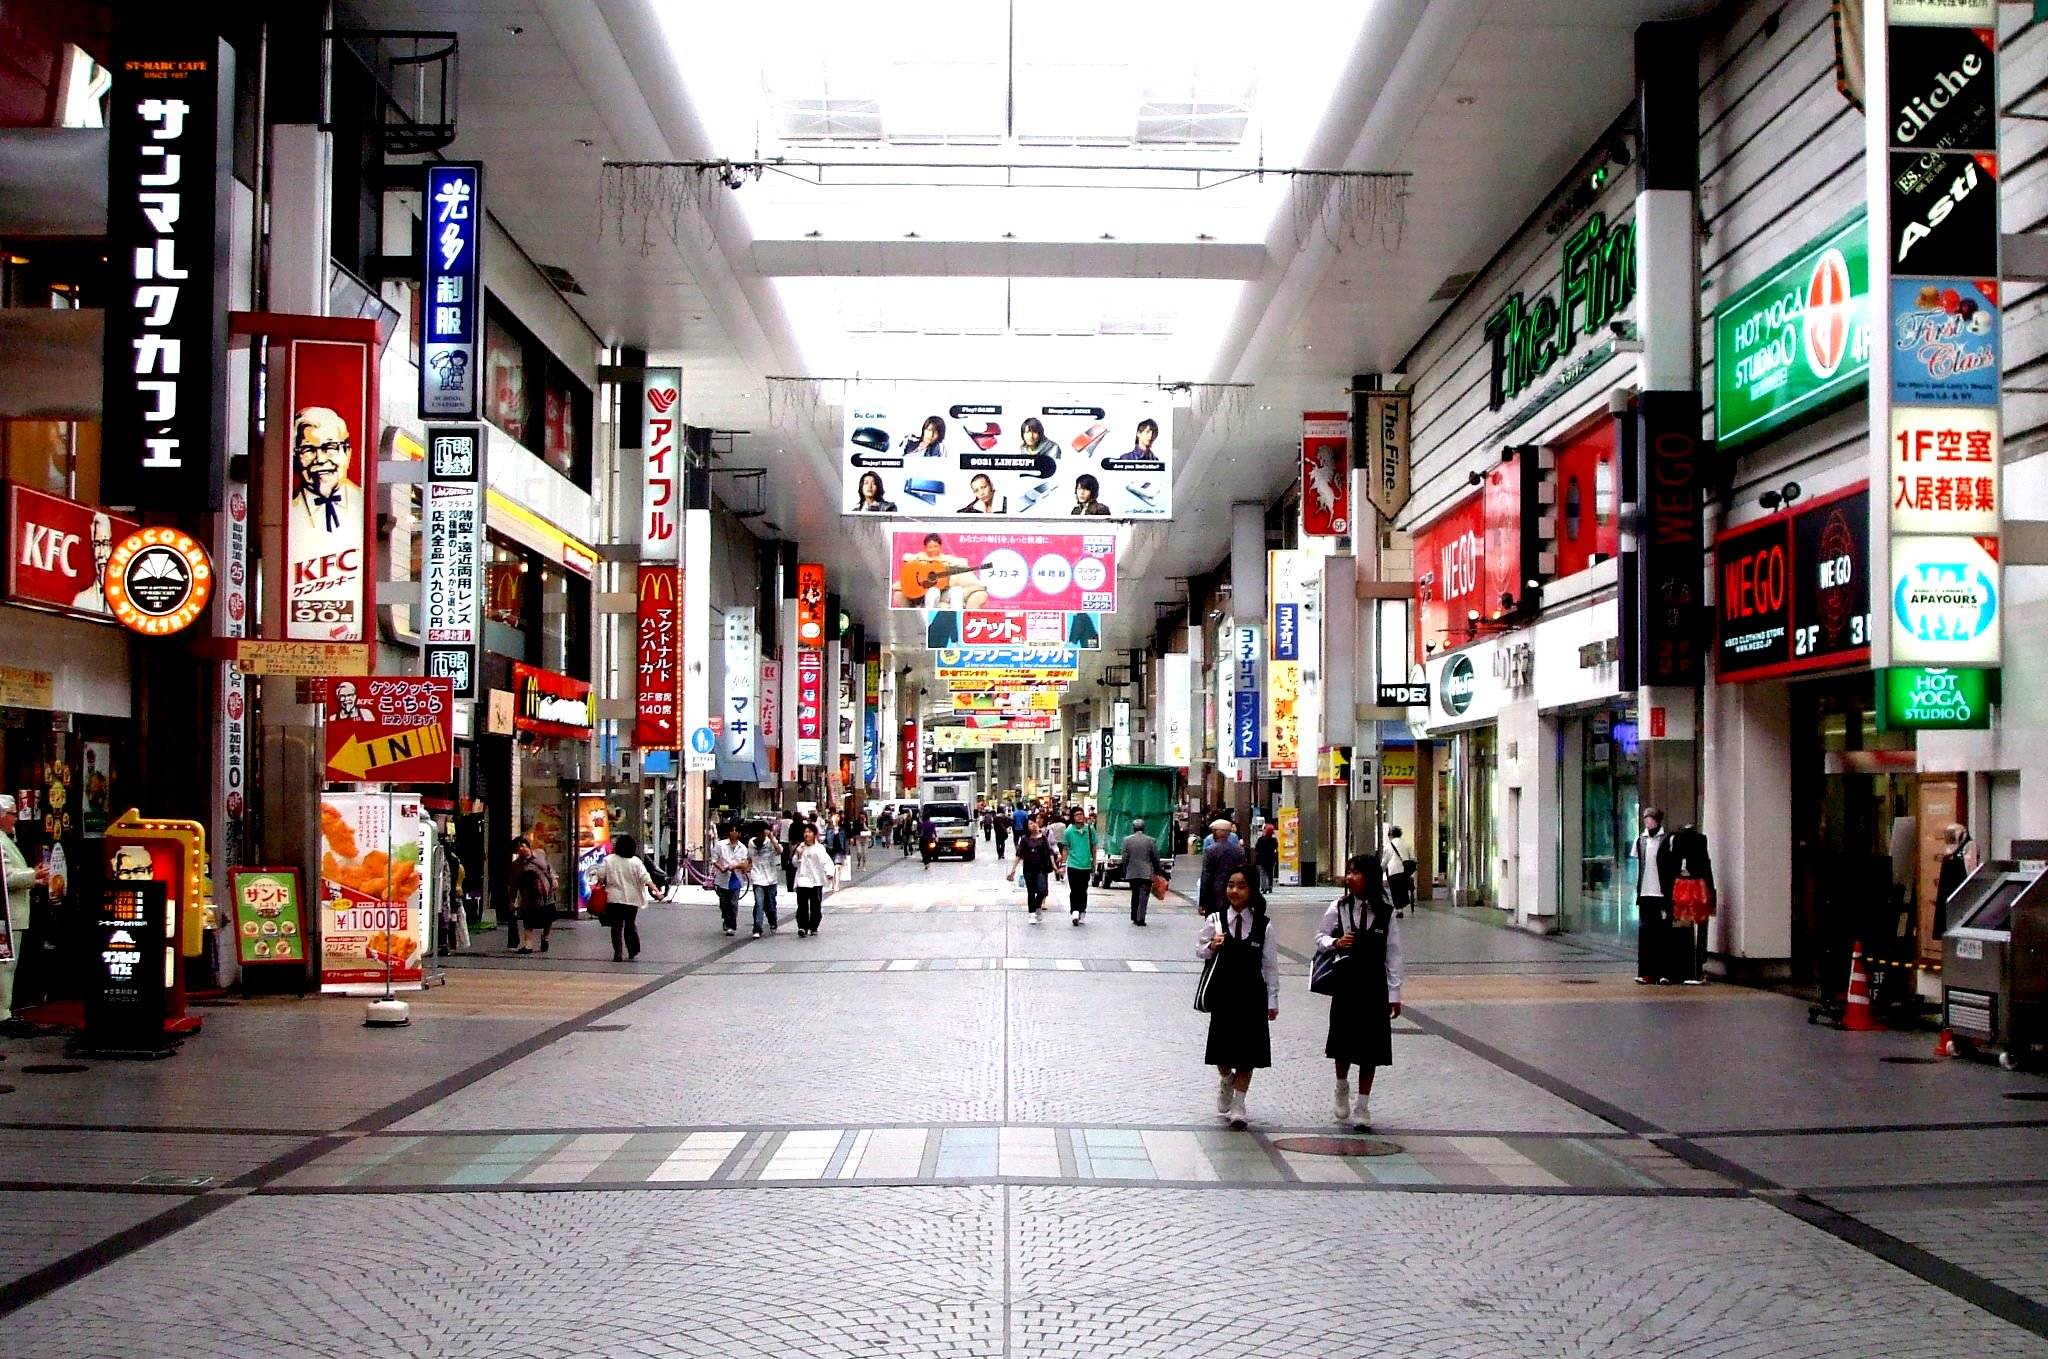 Japanese consumers prefer brick and mortar stores